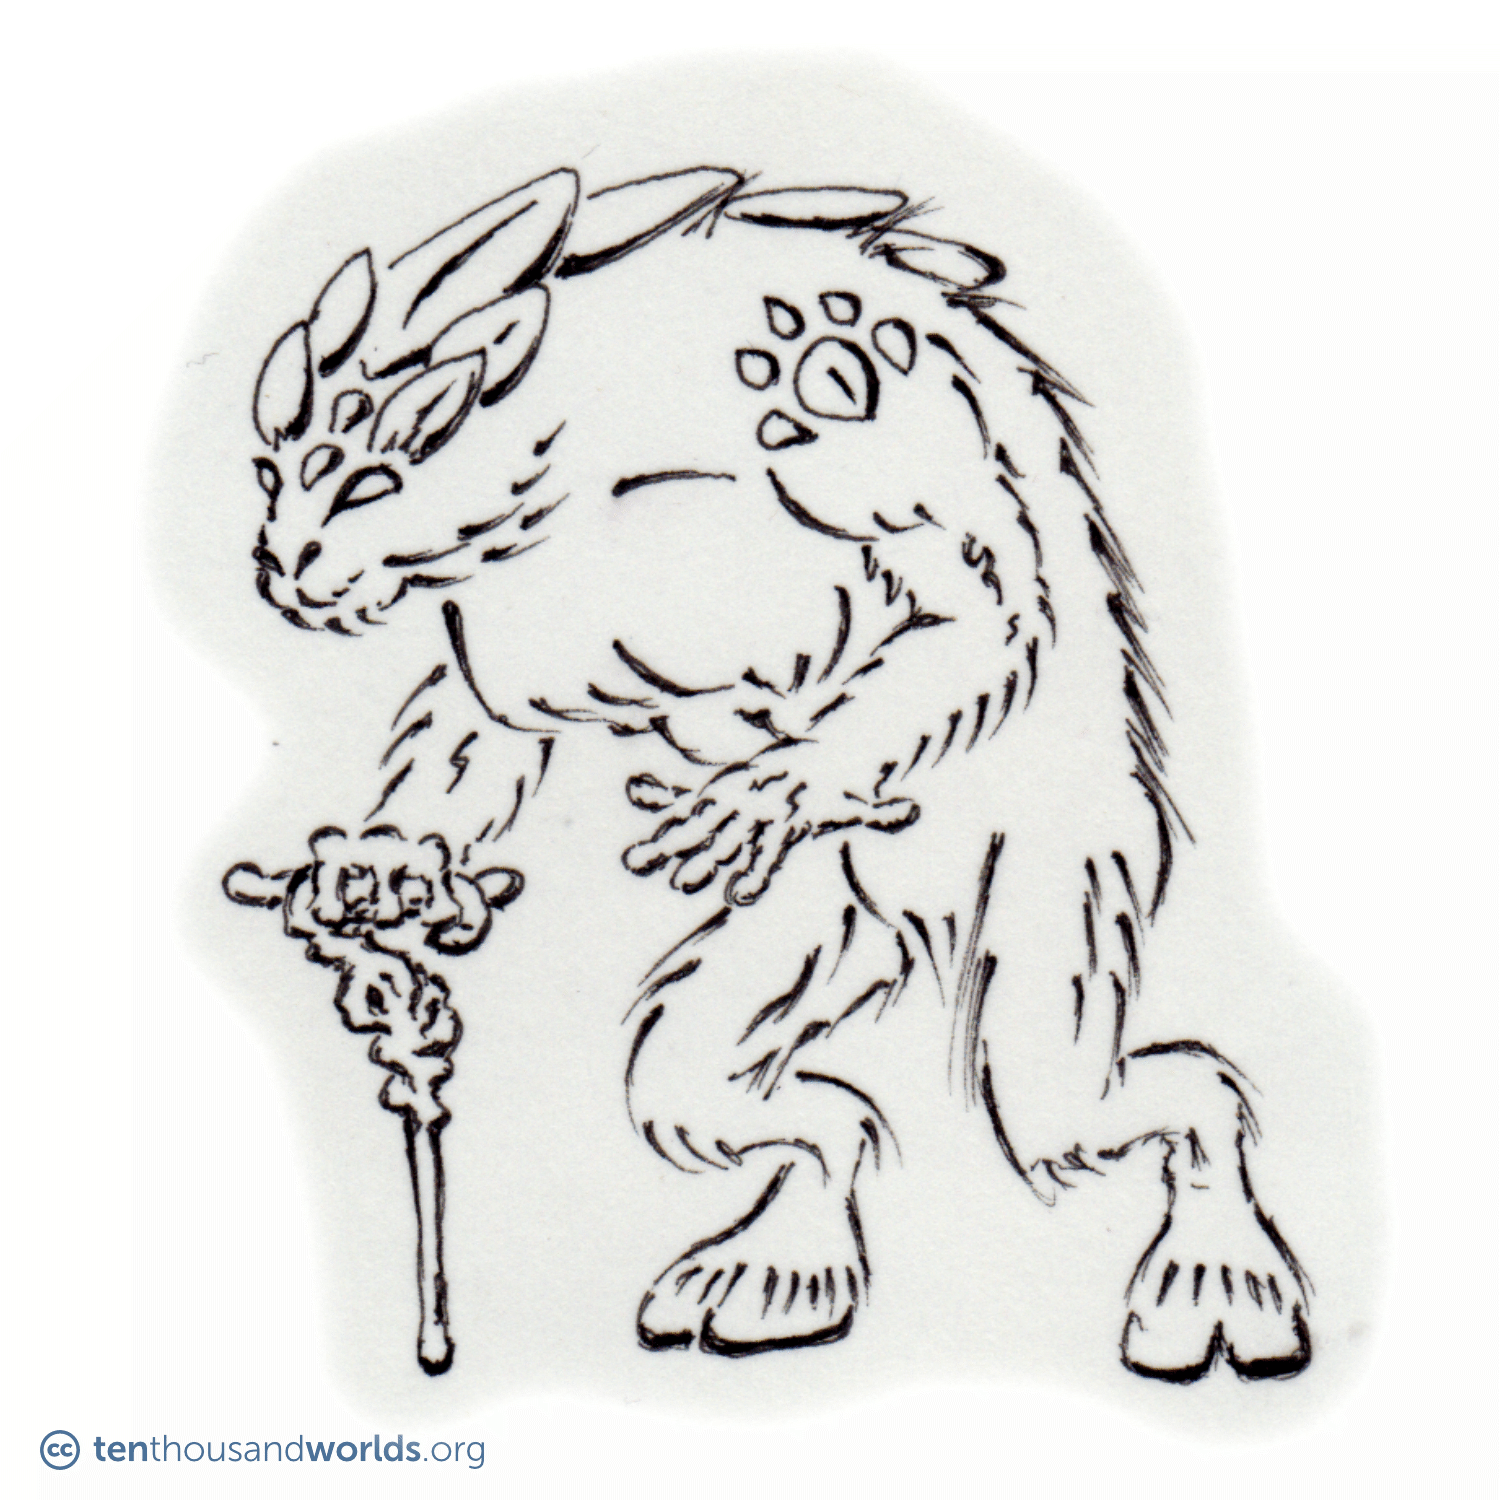 An ink outline of a furry humanoid being standing on cloven hooves and leaning on a gnarled staff, with three fingers and two thumbs on each hand, a heavy chest, bowed back, and an almost feline face. Armored plates protect the head, upper back, and shoulders.